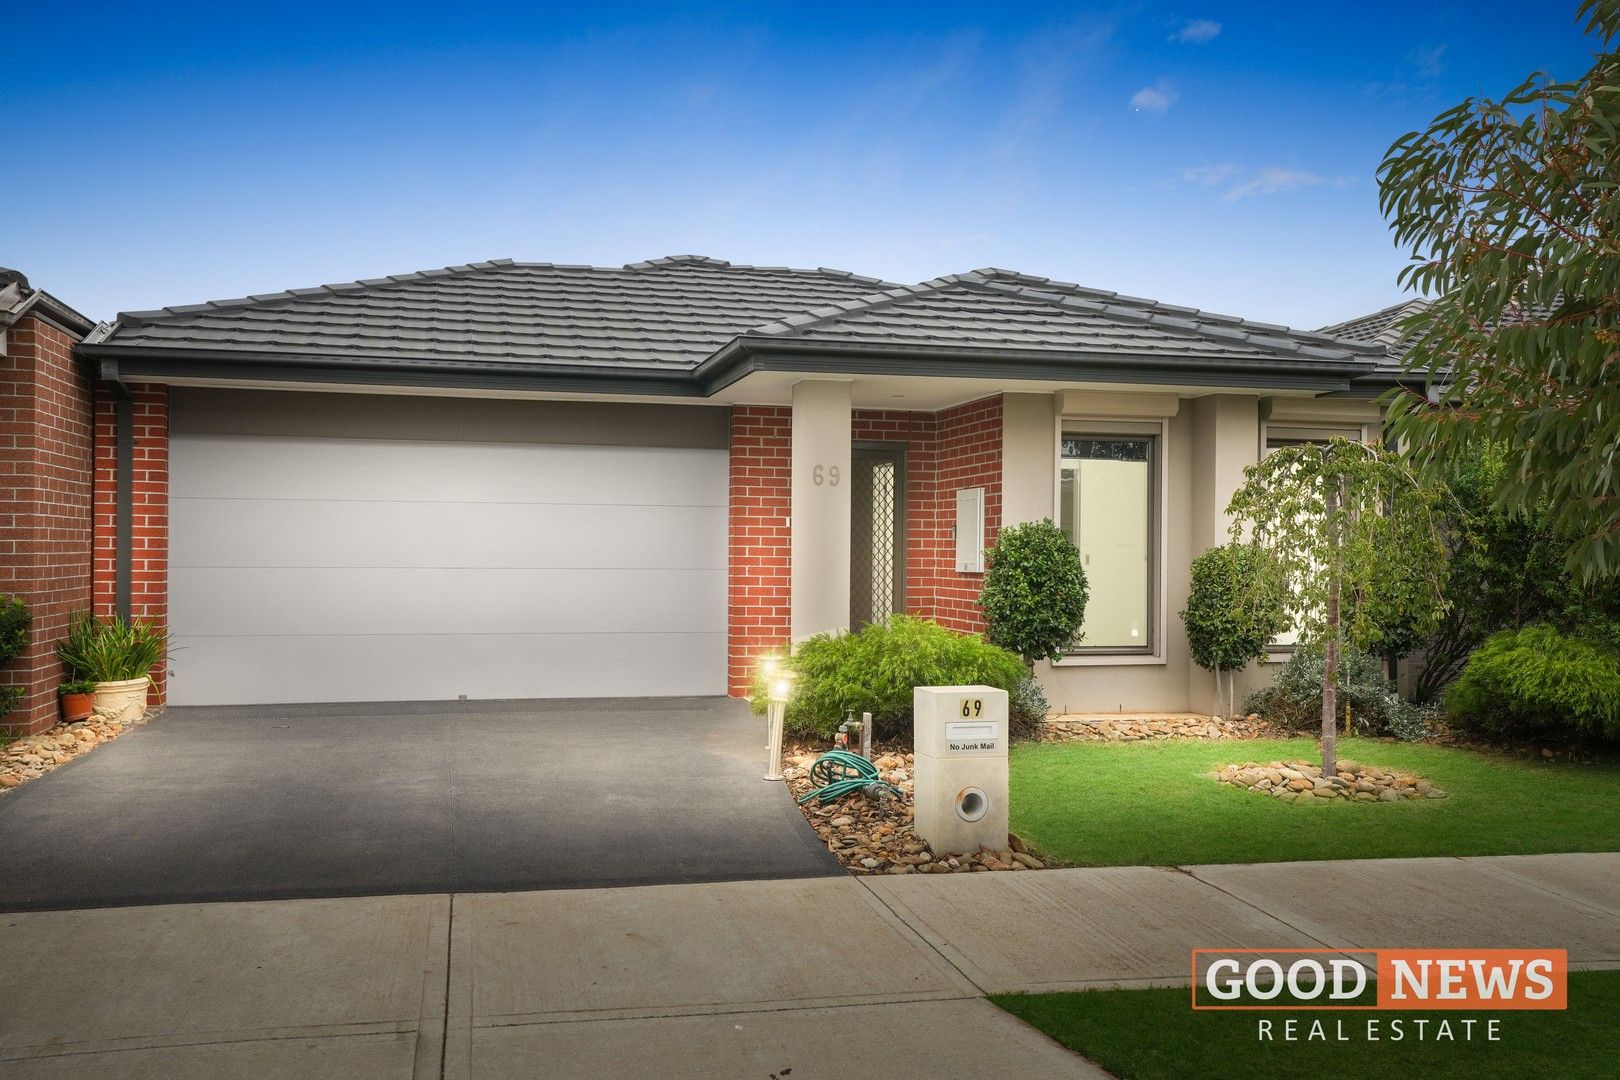 3 bedrooms House in 69 Lancers Drive HARKNESS VIC, 3337